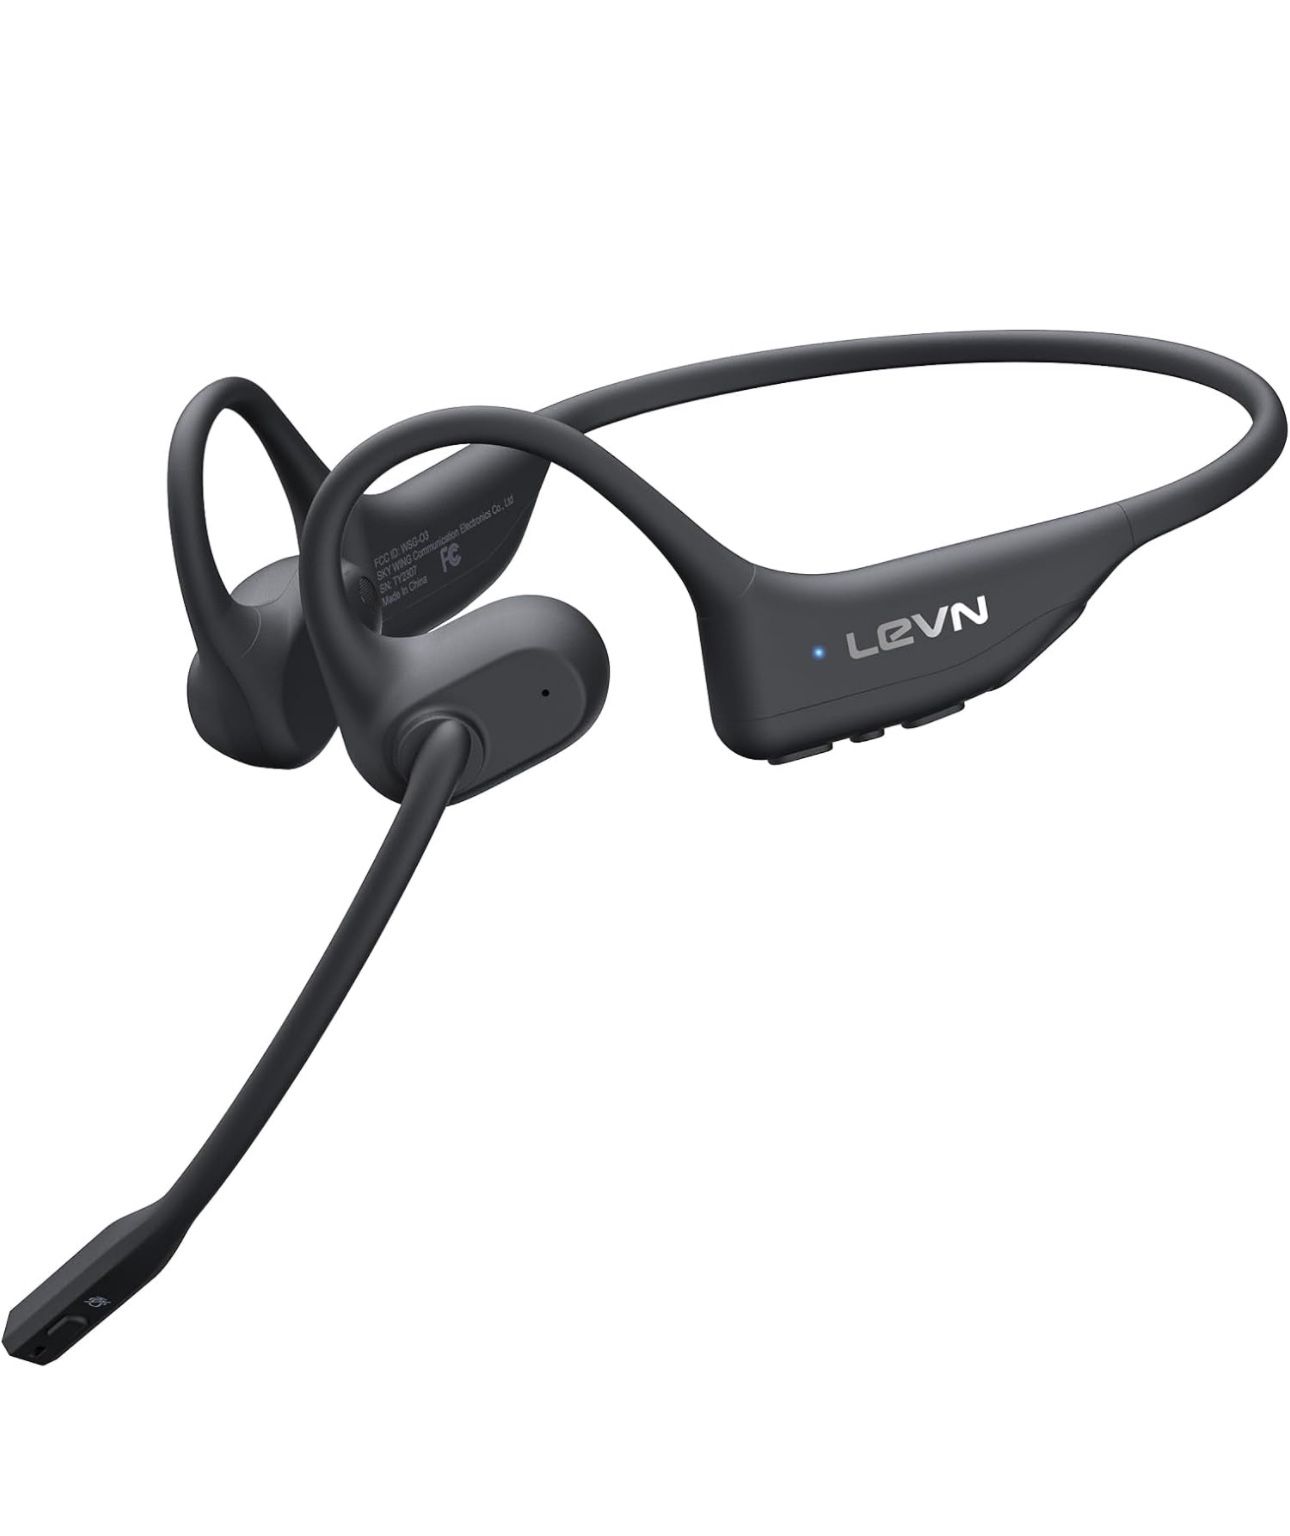 Open Ear Headphones With Mic - Bluetooth Headset With Microphone - Work Driving Running Workouts Headset - Levn 